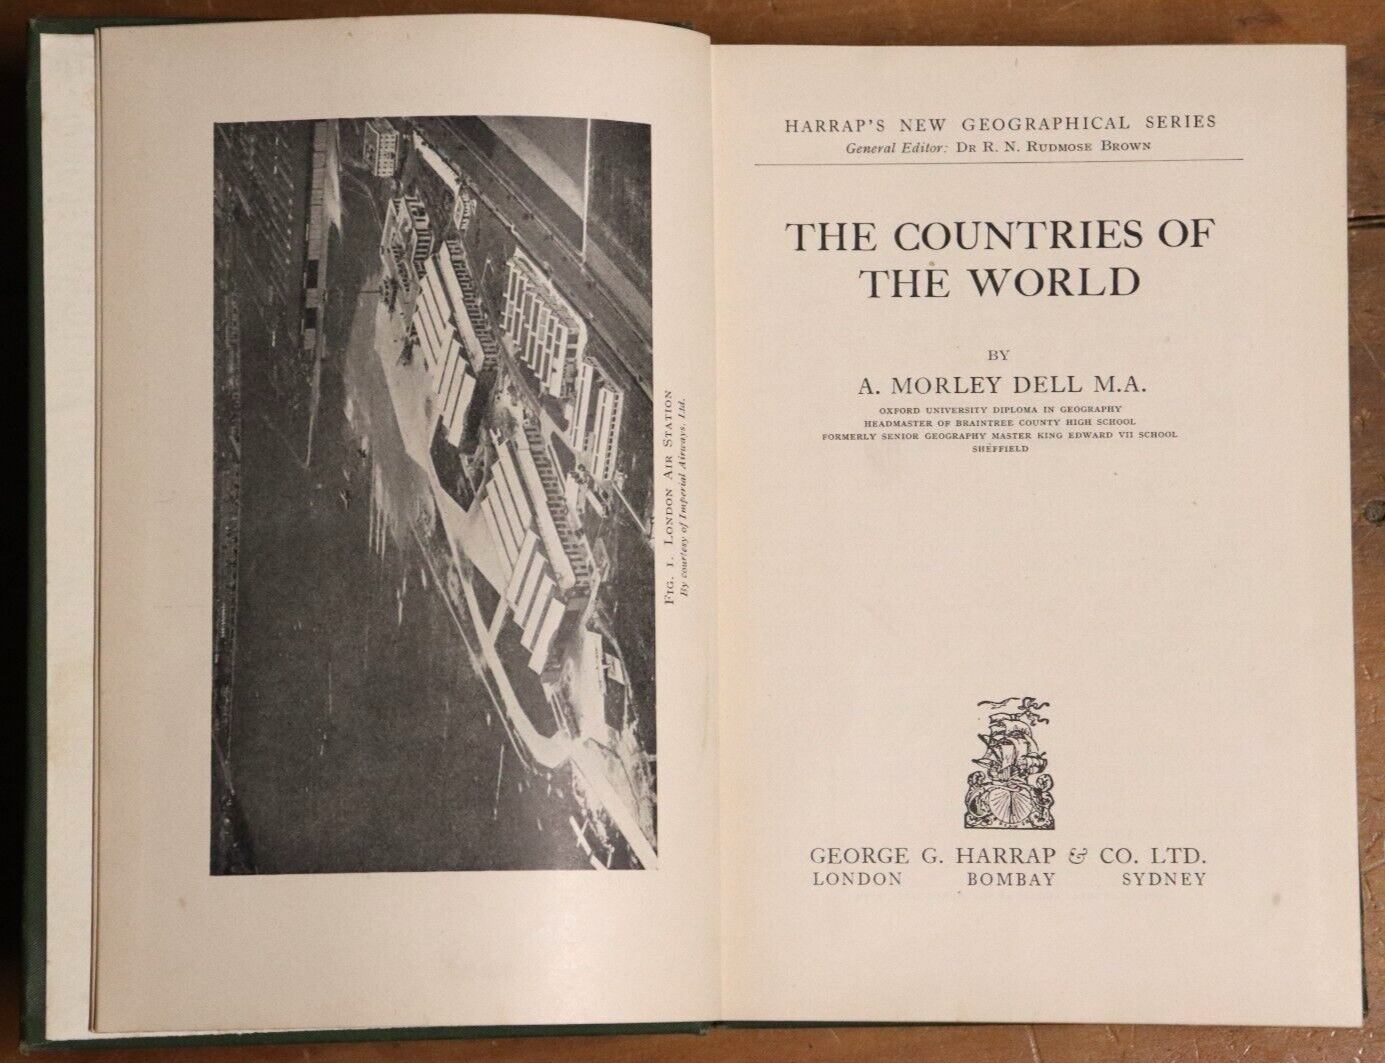 1932 The Countries Of The World by A Morley Dell Antique Geography Book - 0